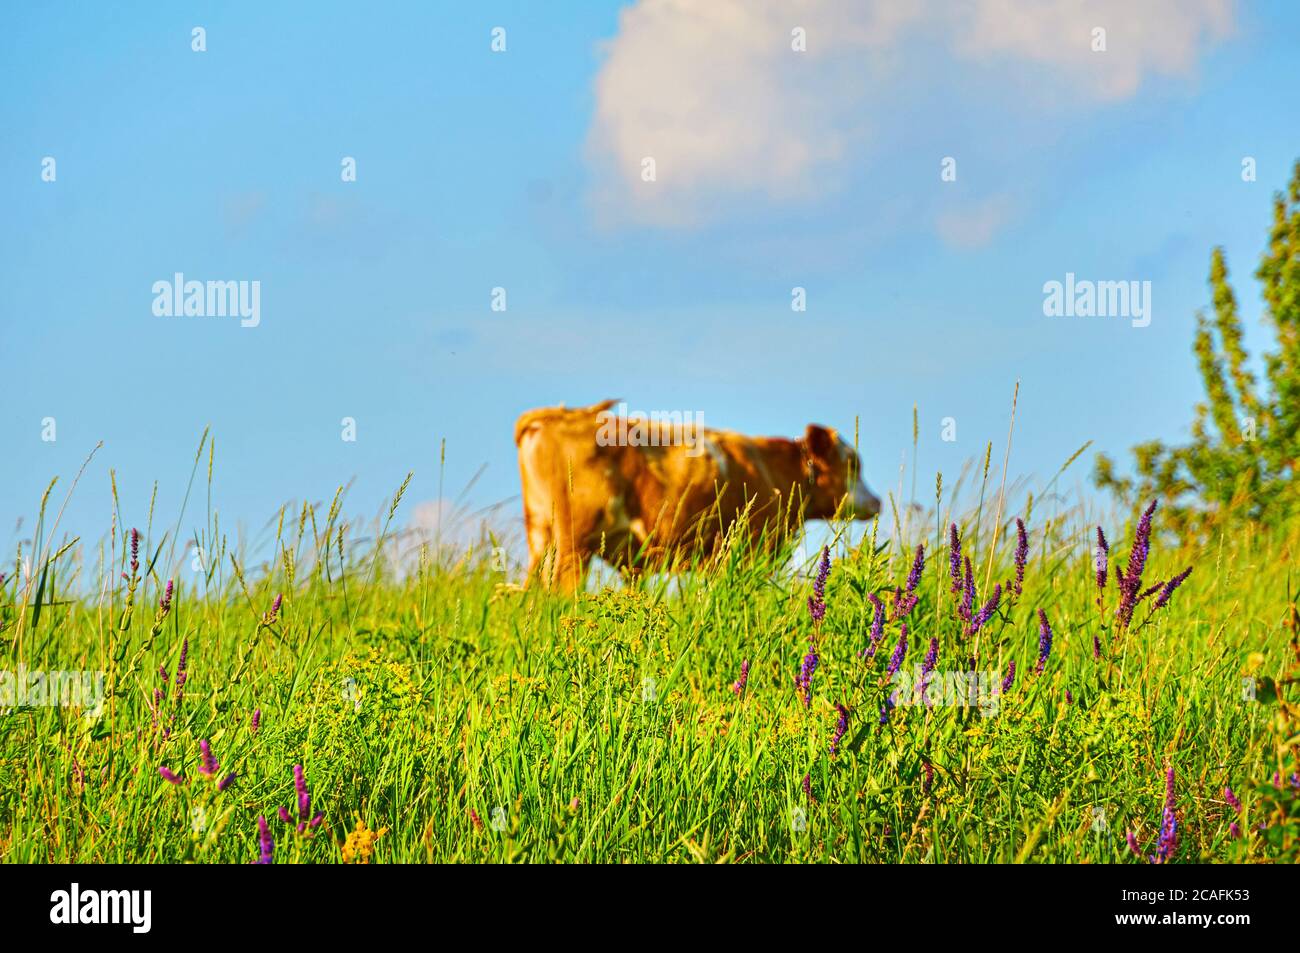 Blurred cow grazing in a green pasture against a blue sky. Stock Photo